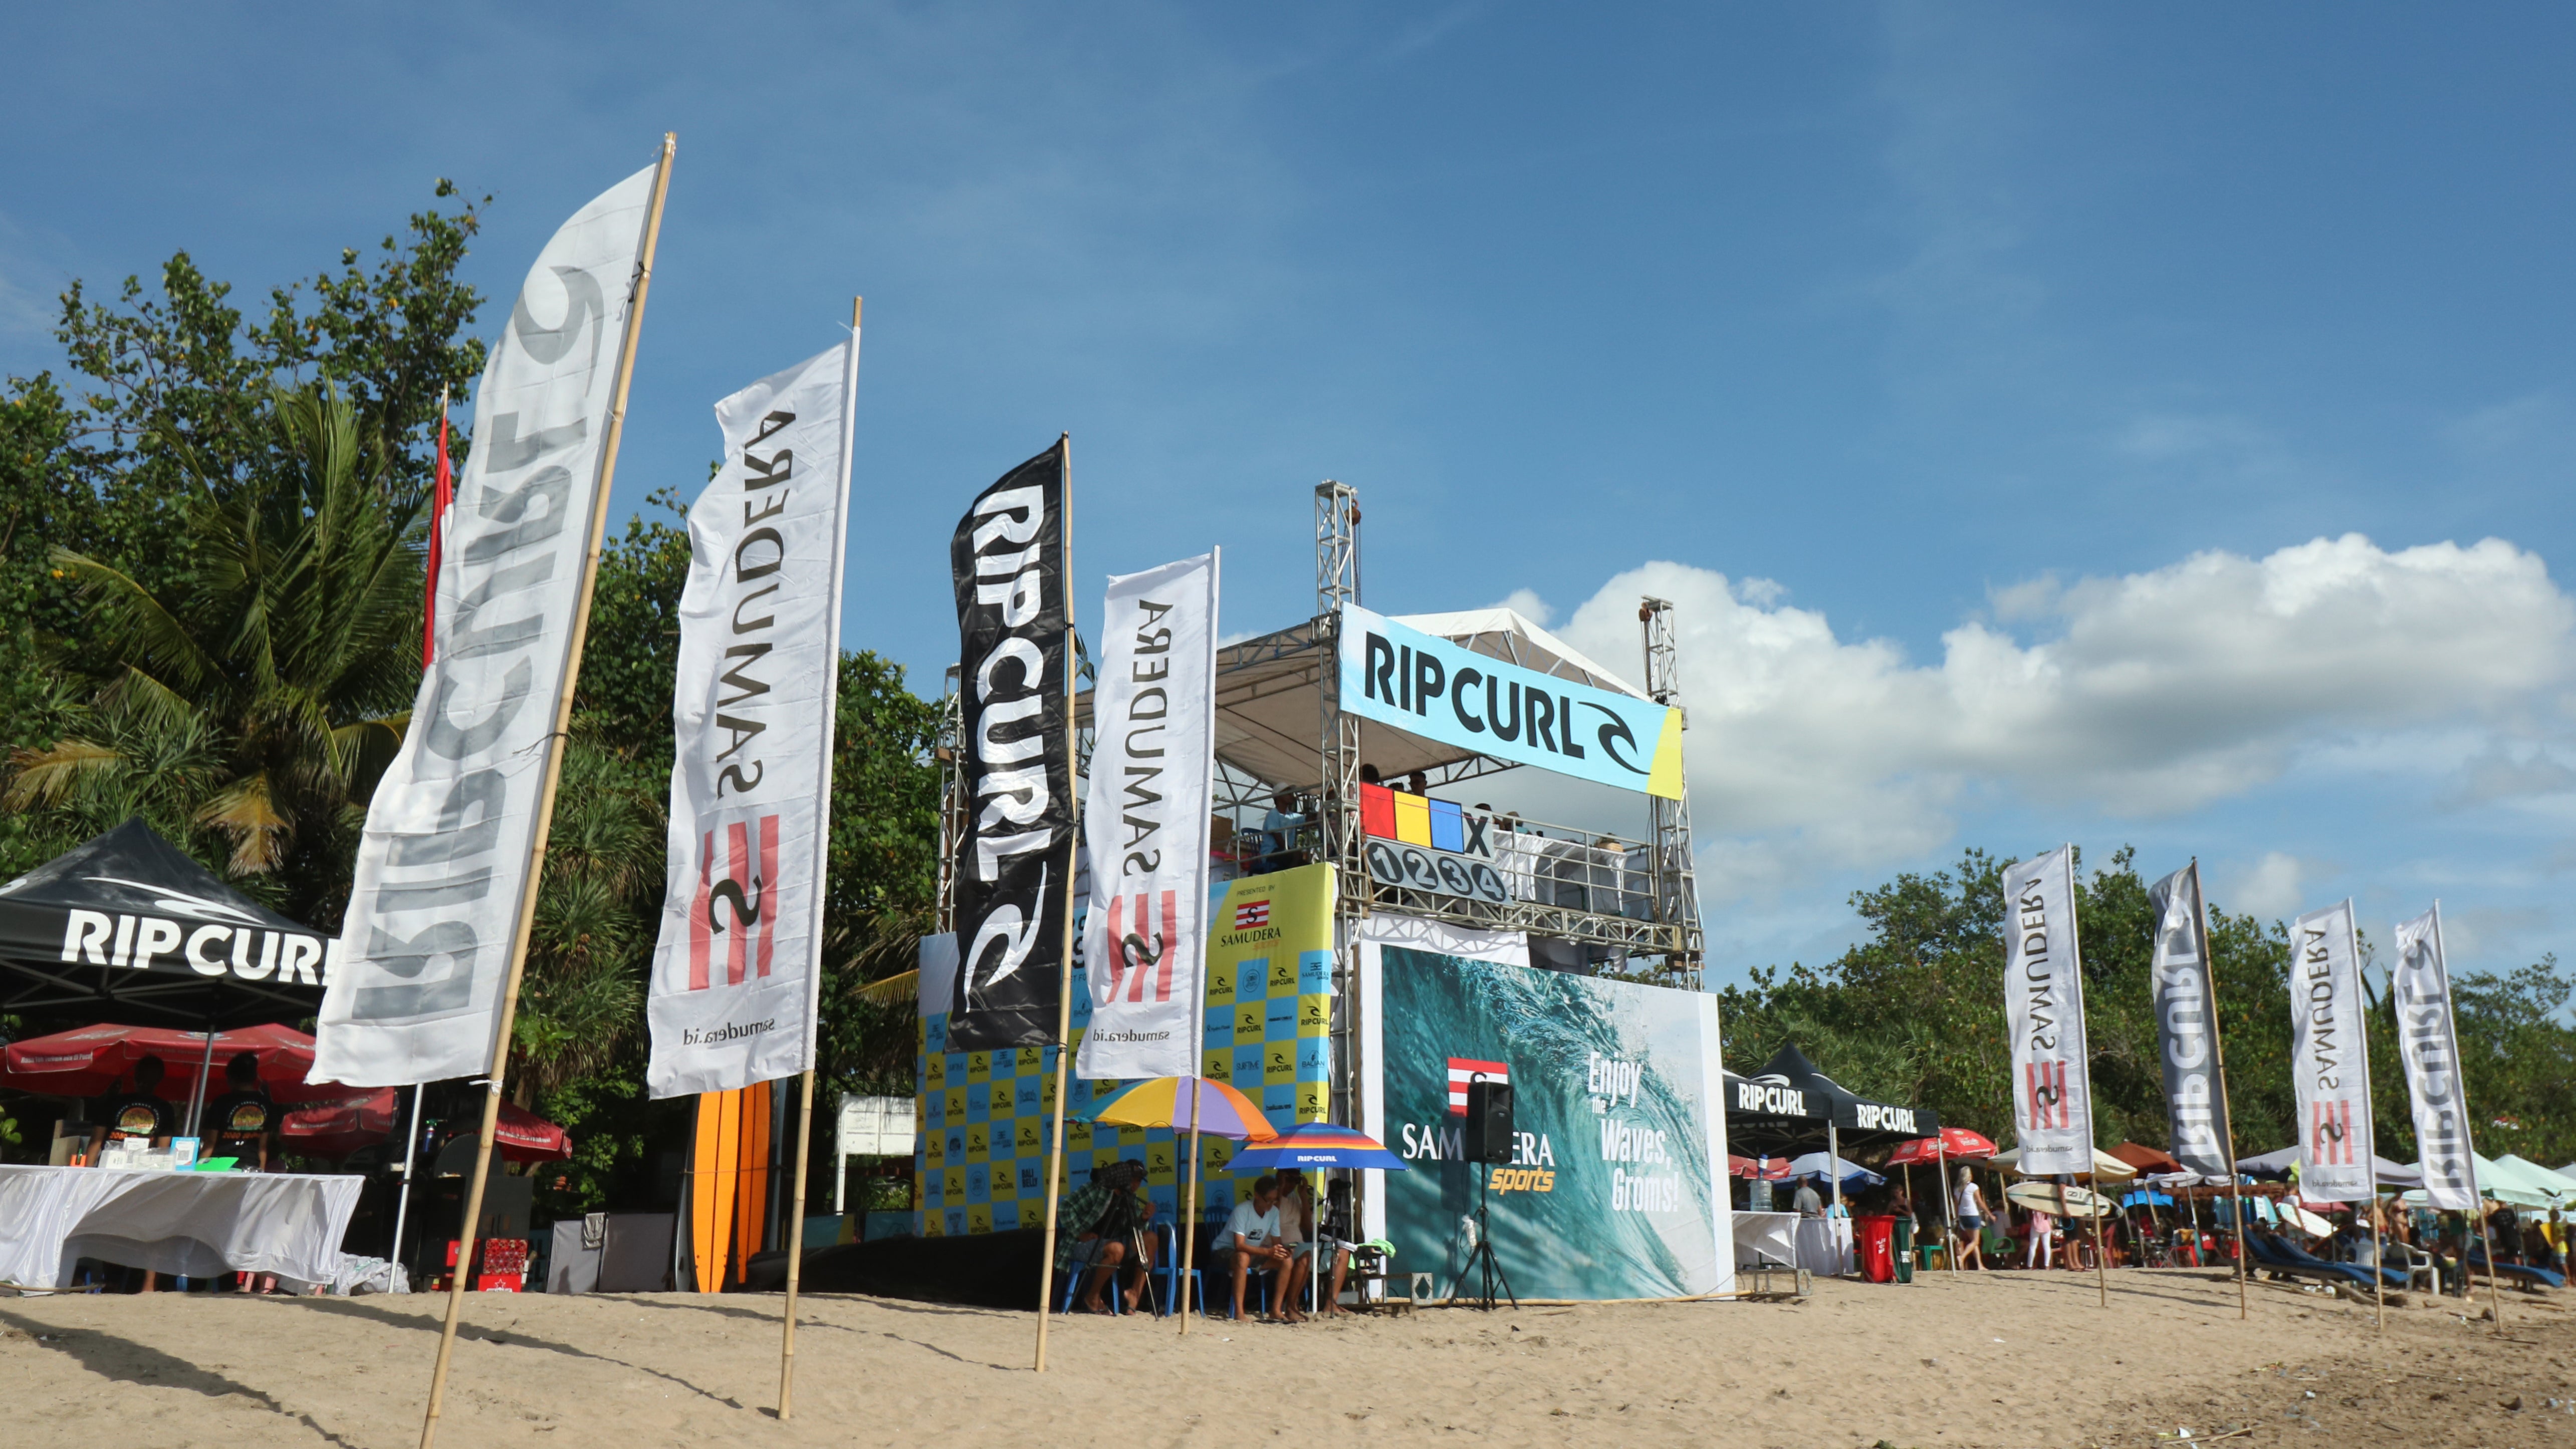 Day-1 Highlights of The Rip Curl GromSearch 2022